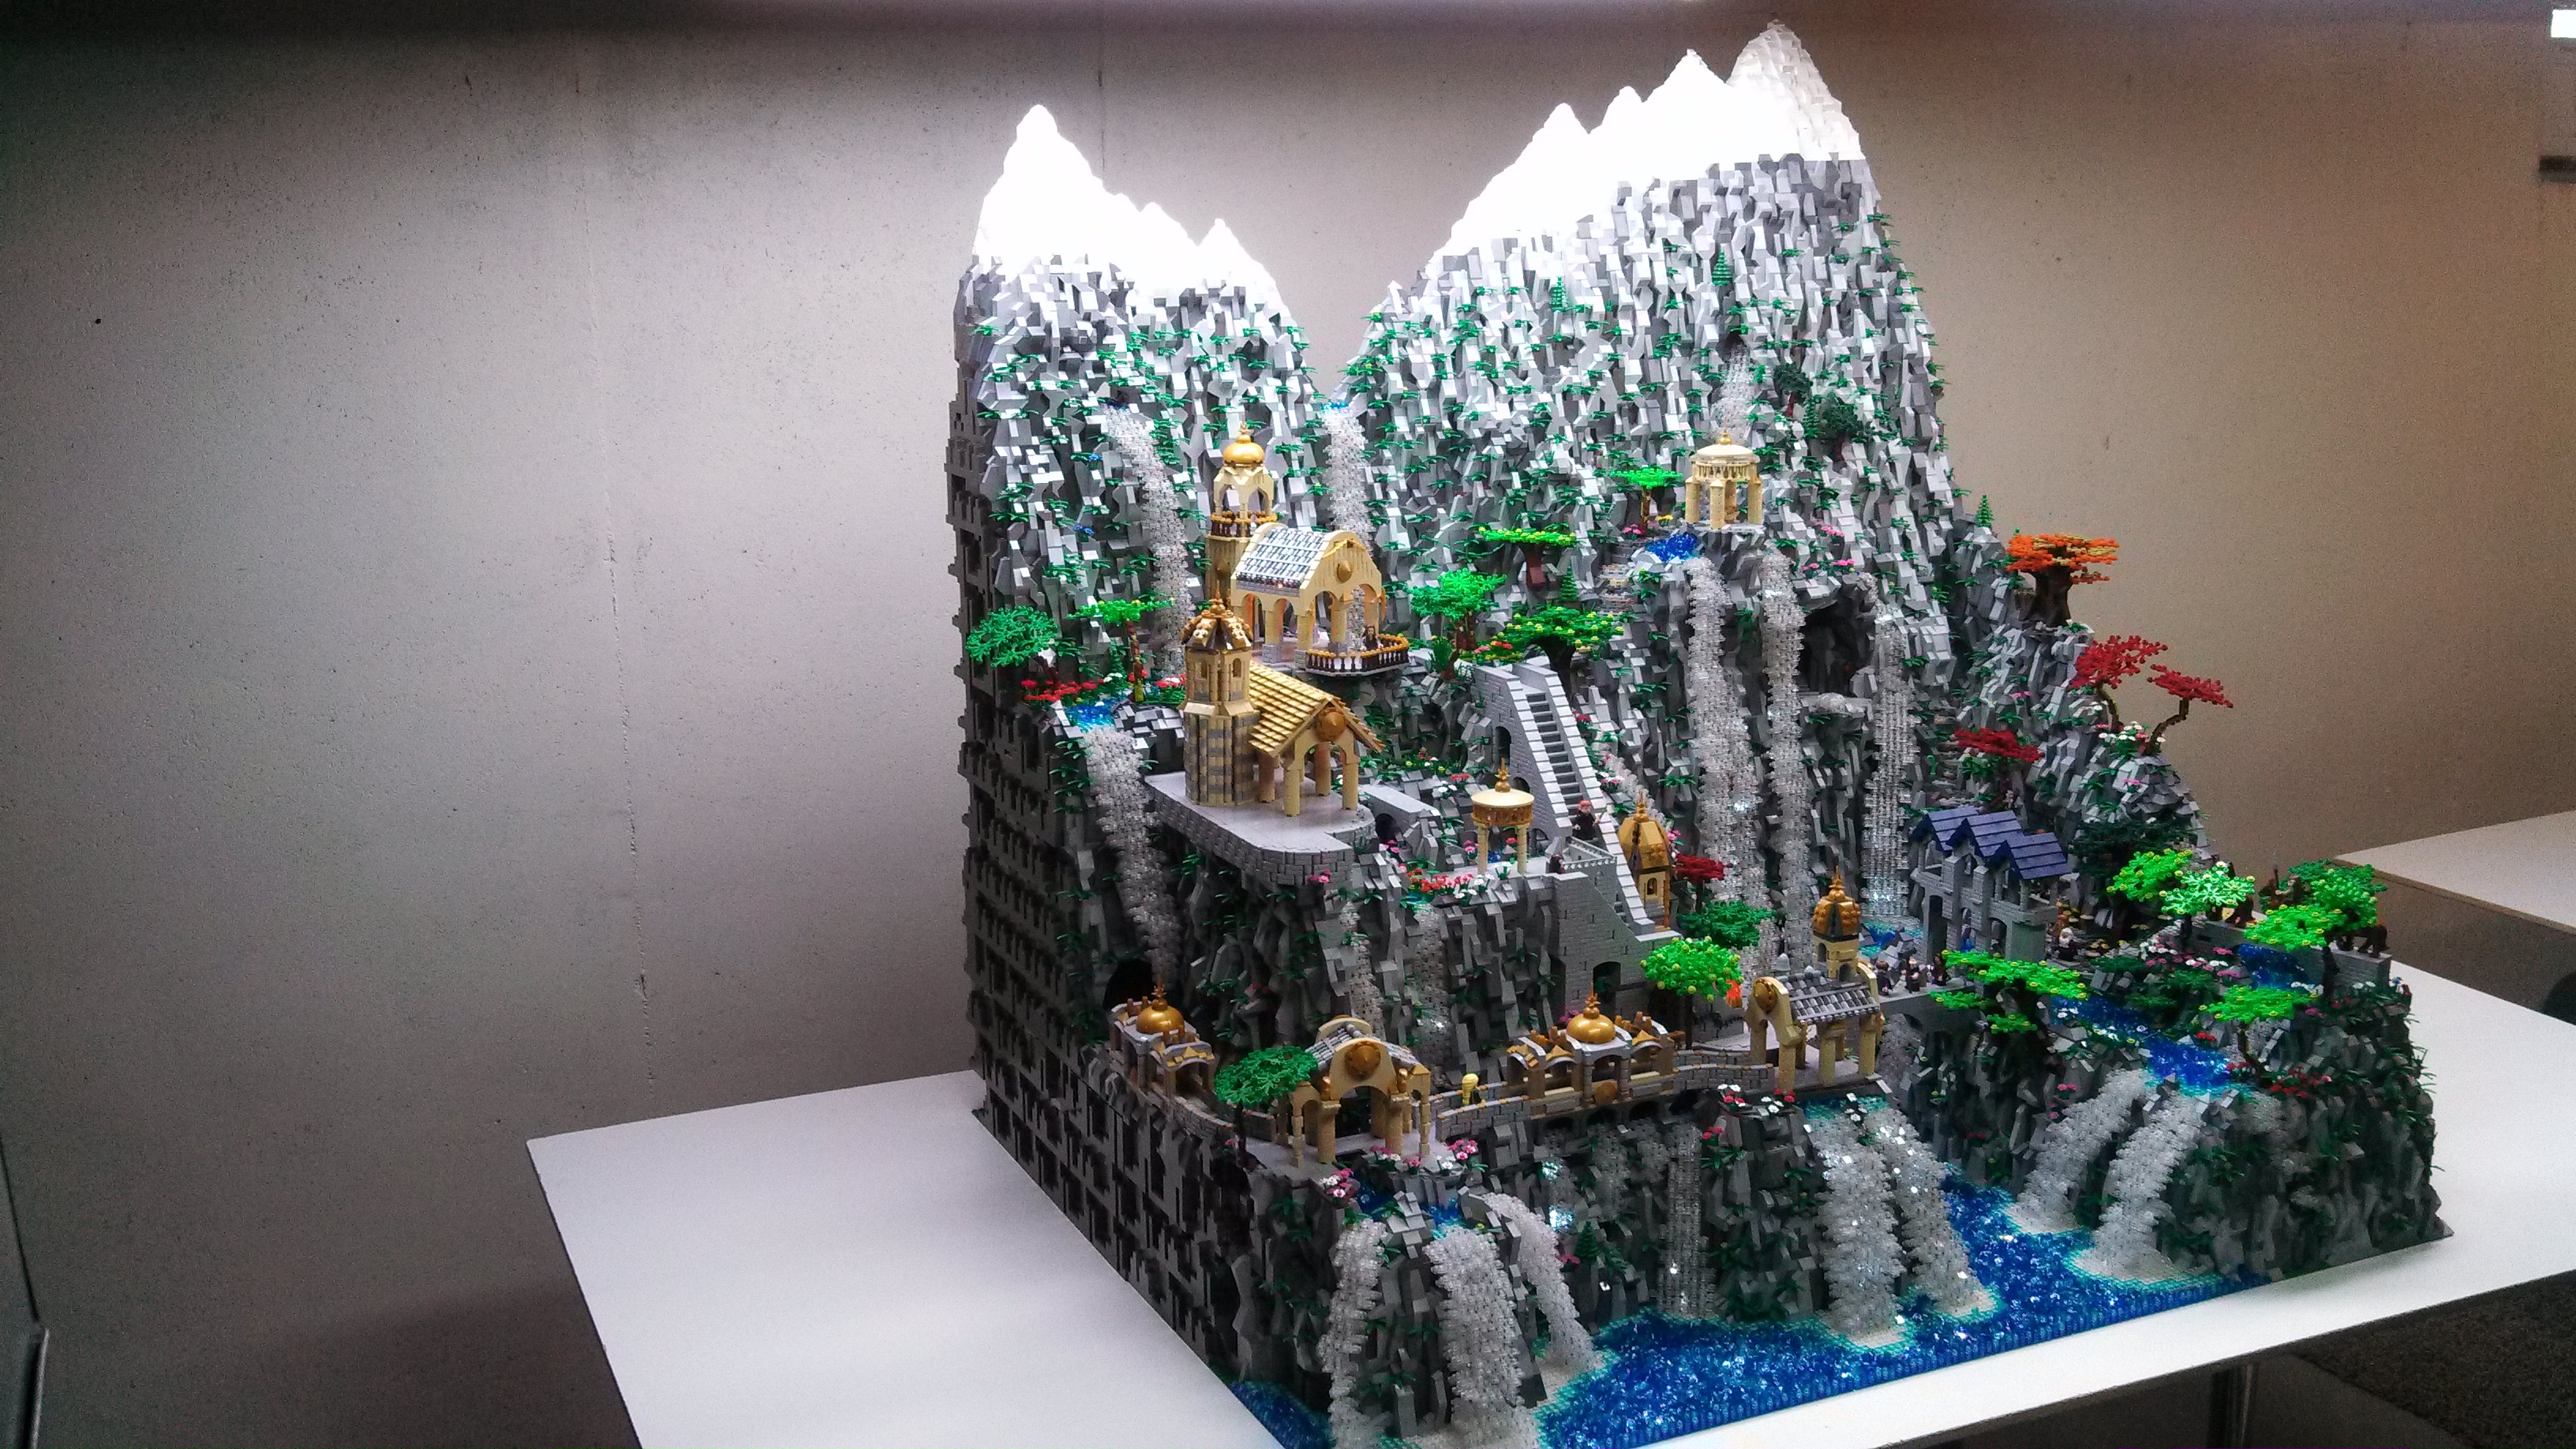 Check out this Lego Rivendell!